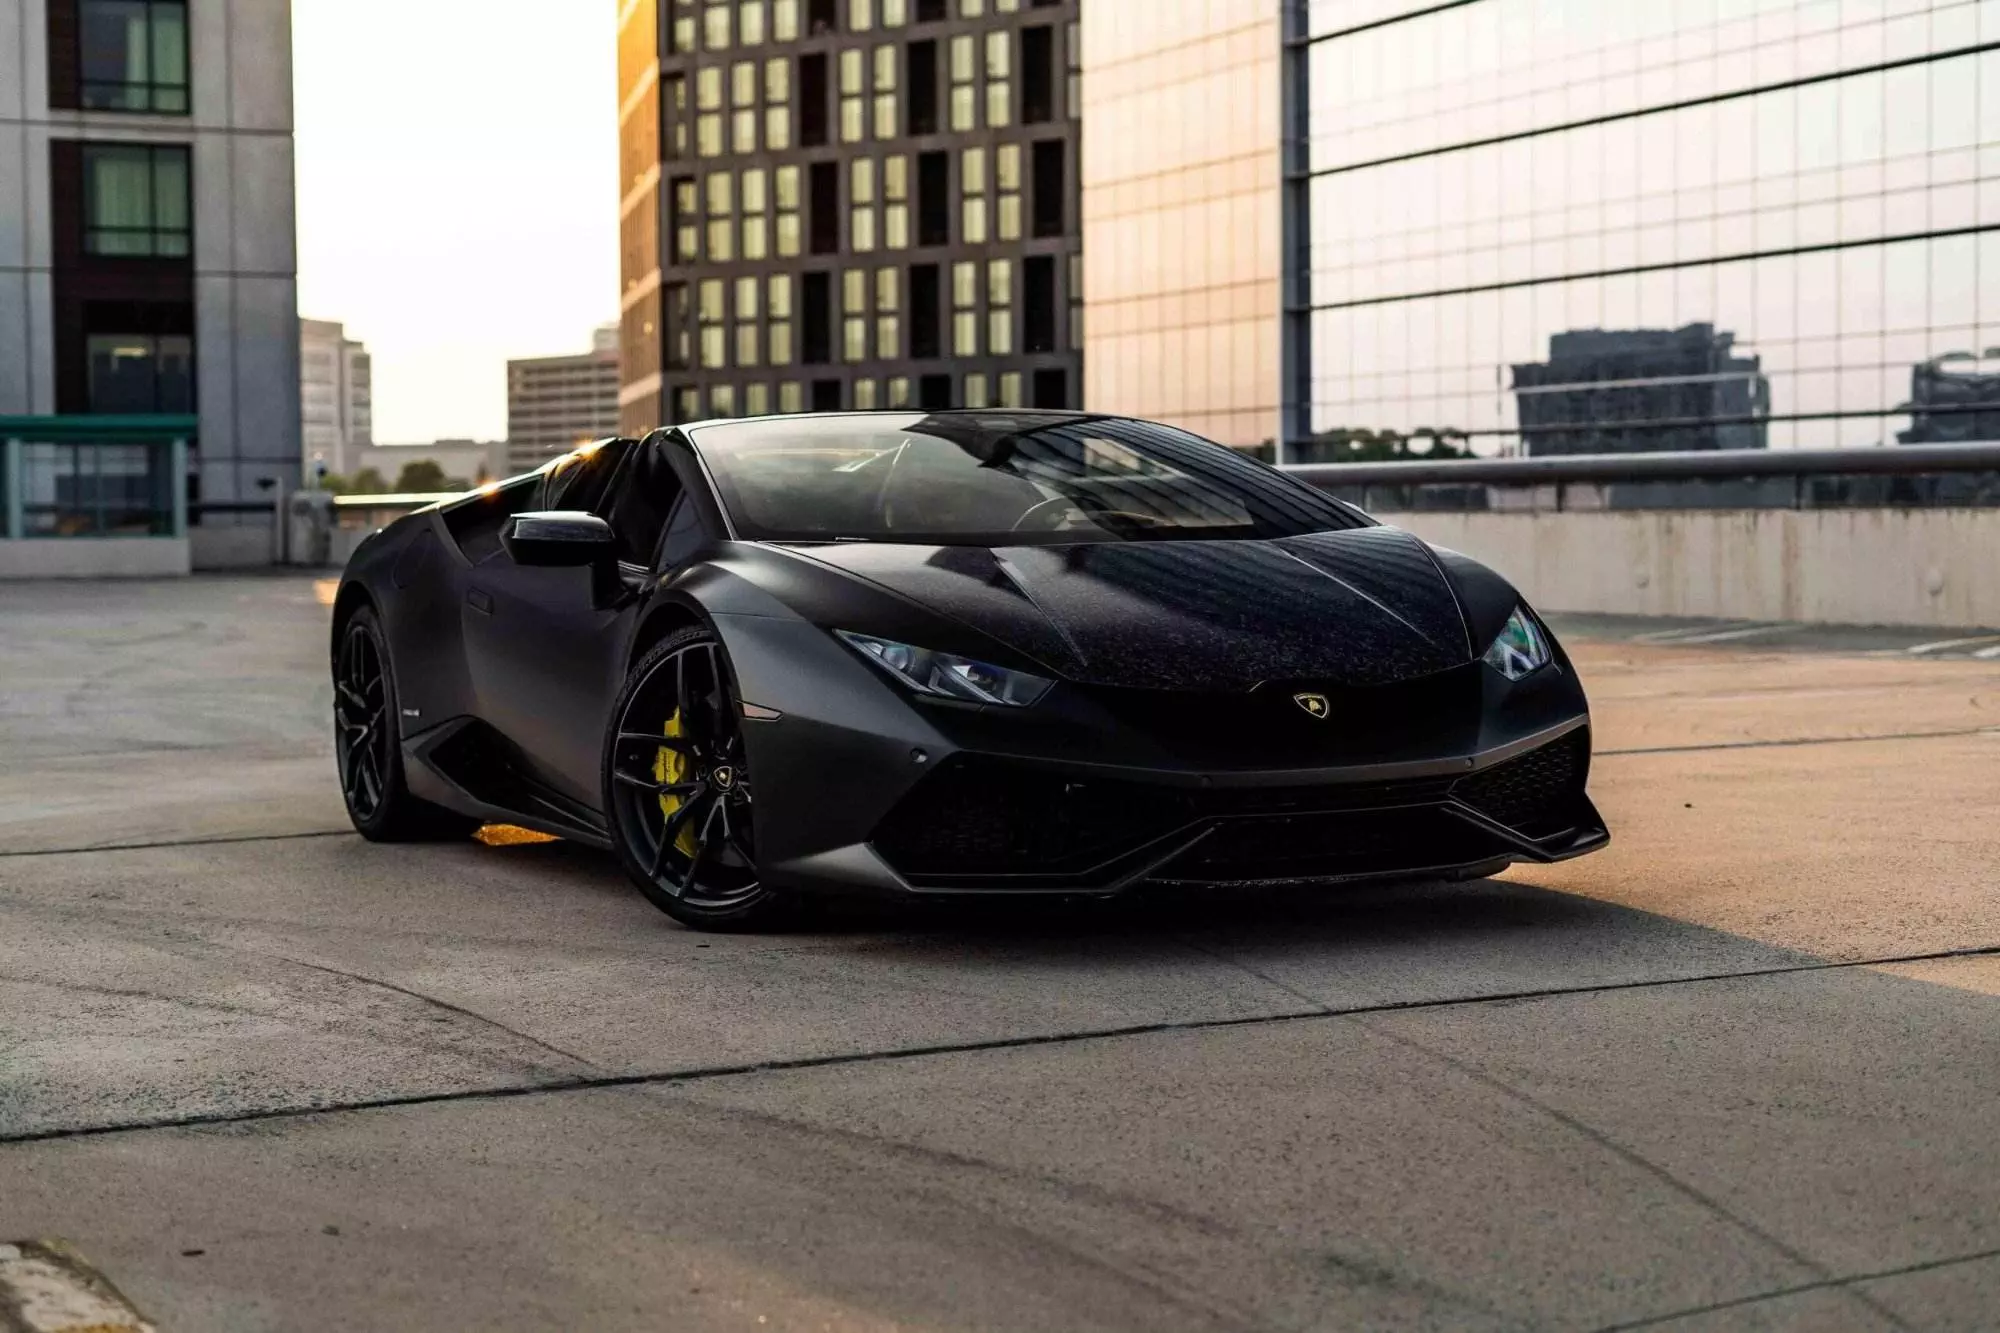 Capital Exotic offers exotic car rental services of day to day rental for many luxury car brands like Lamborghini, Ferrari, Rolls Royce, Chevrolet, Bentley, BMW, Mercedes, Porsche , Audi and even more exotic car brands on Best price rates.